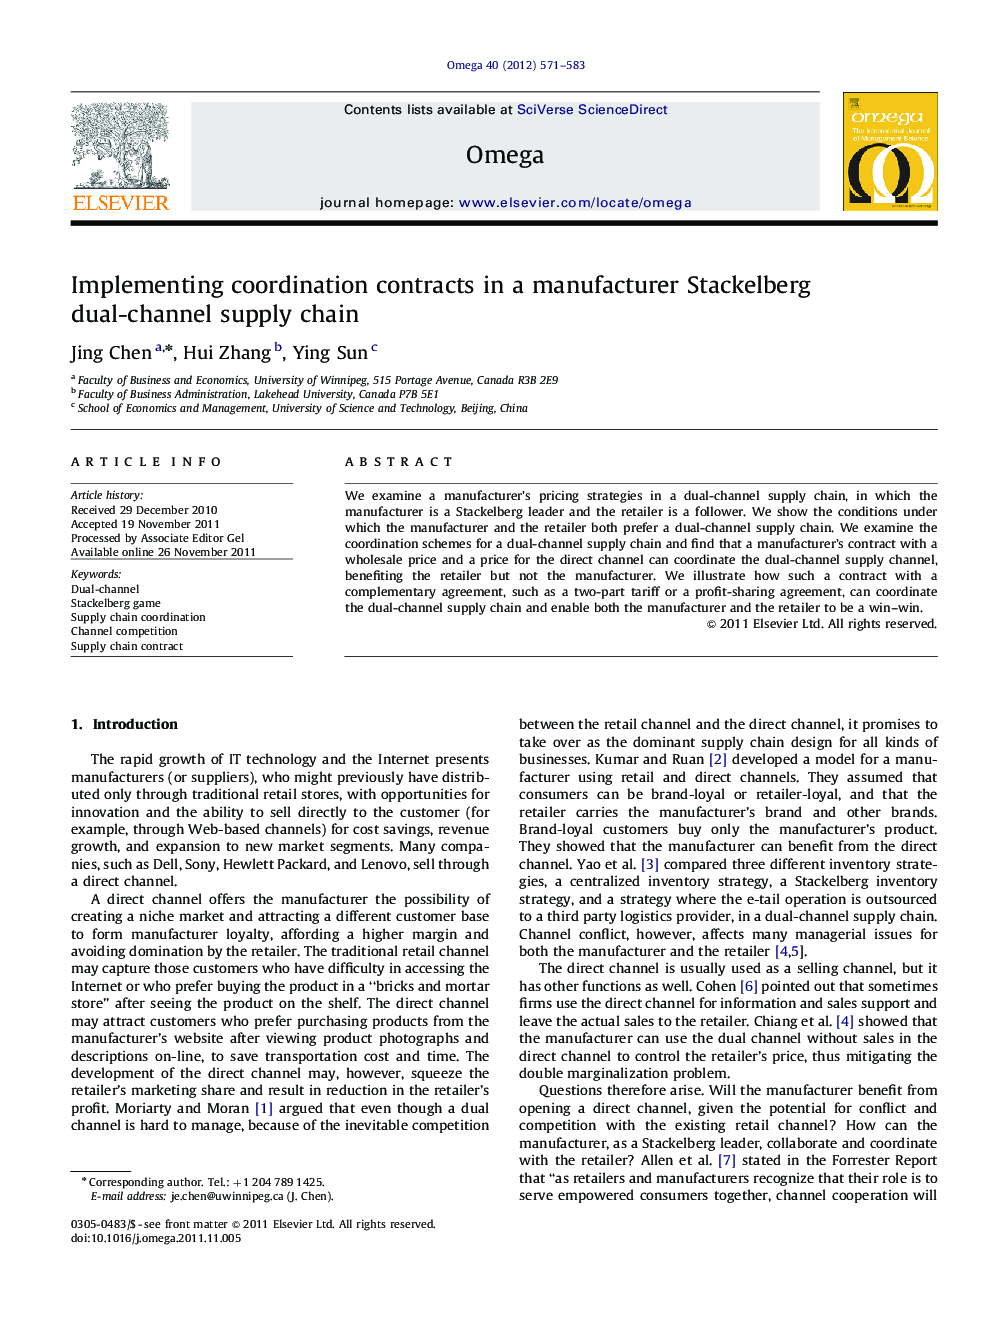 Implementing coordination contracts in a manufacturer Stackelberg dual-channel supply chain